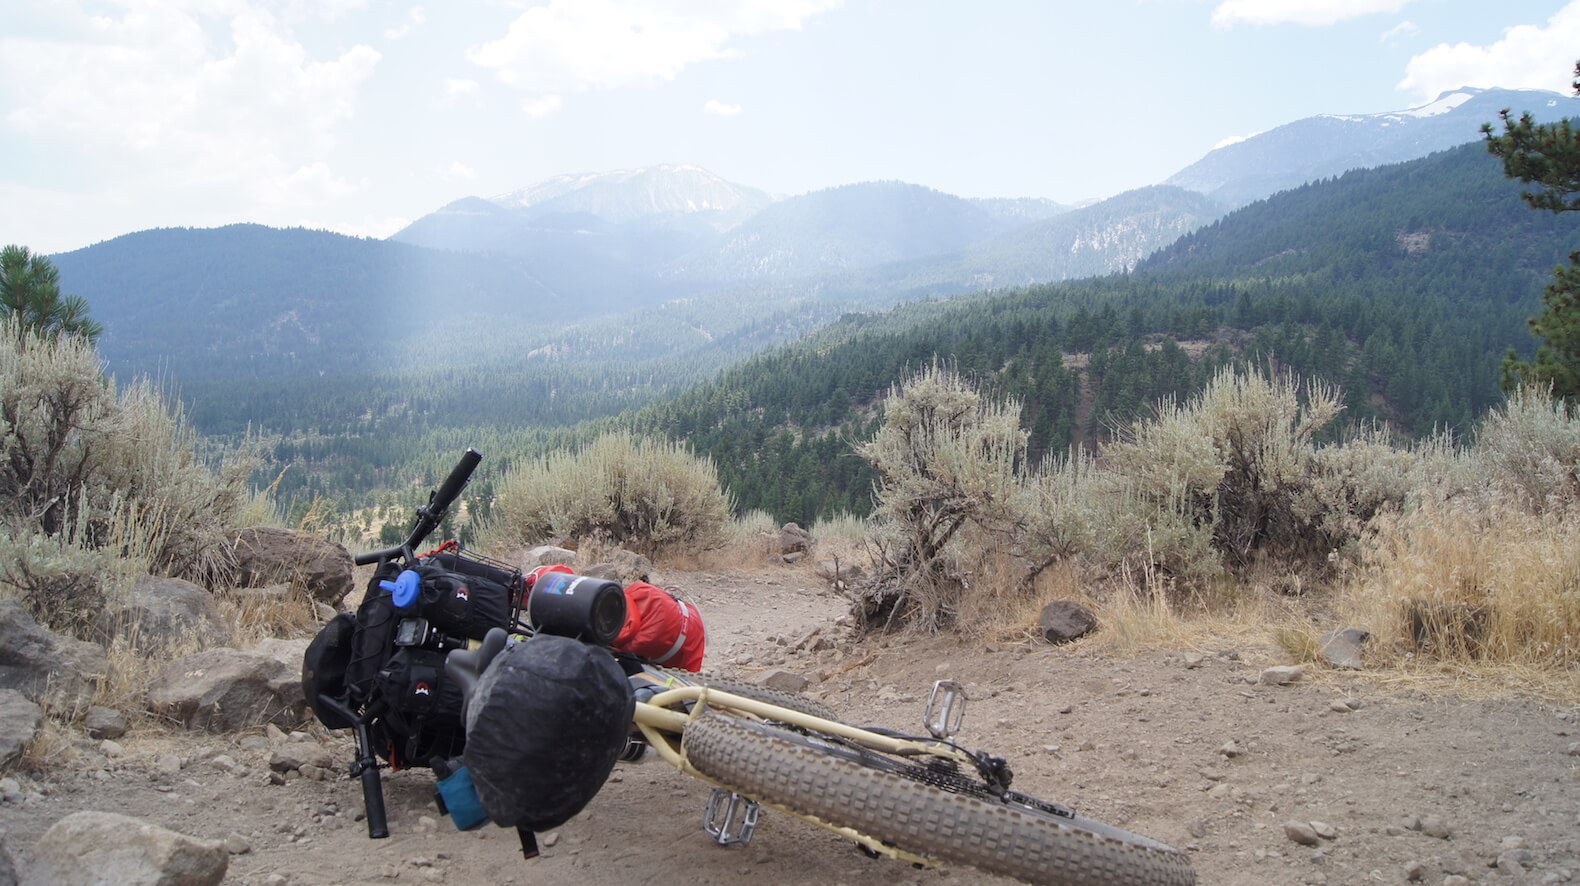 Rear view of a bike, loaded with gear, laying on its side on a gravel rocky trail, with foggy mountains ahead